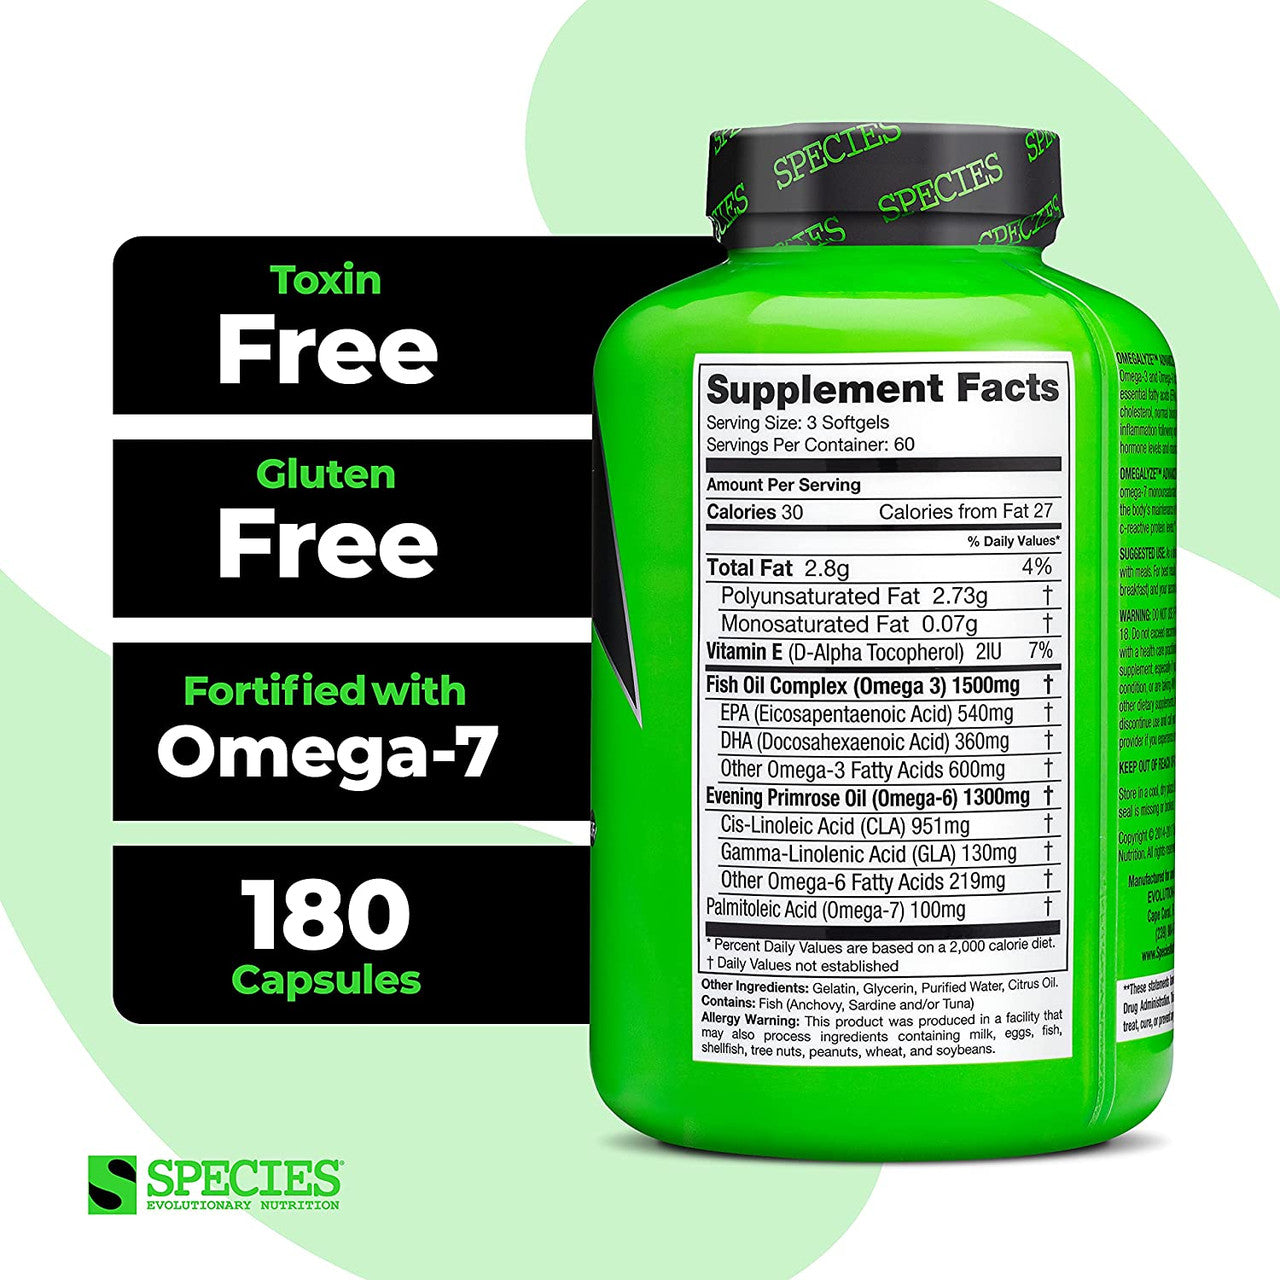 Species Nutrition Omegalyze Supplement Facts